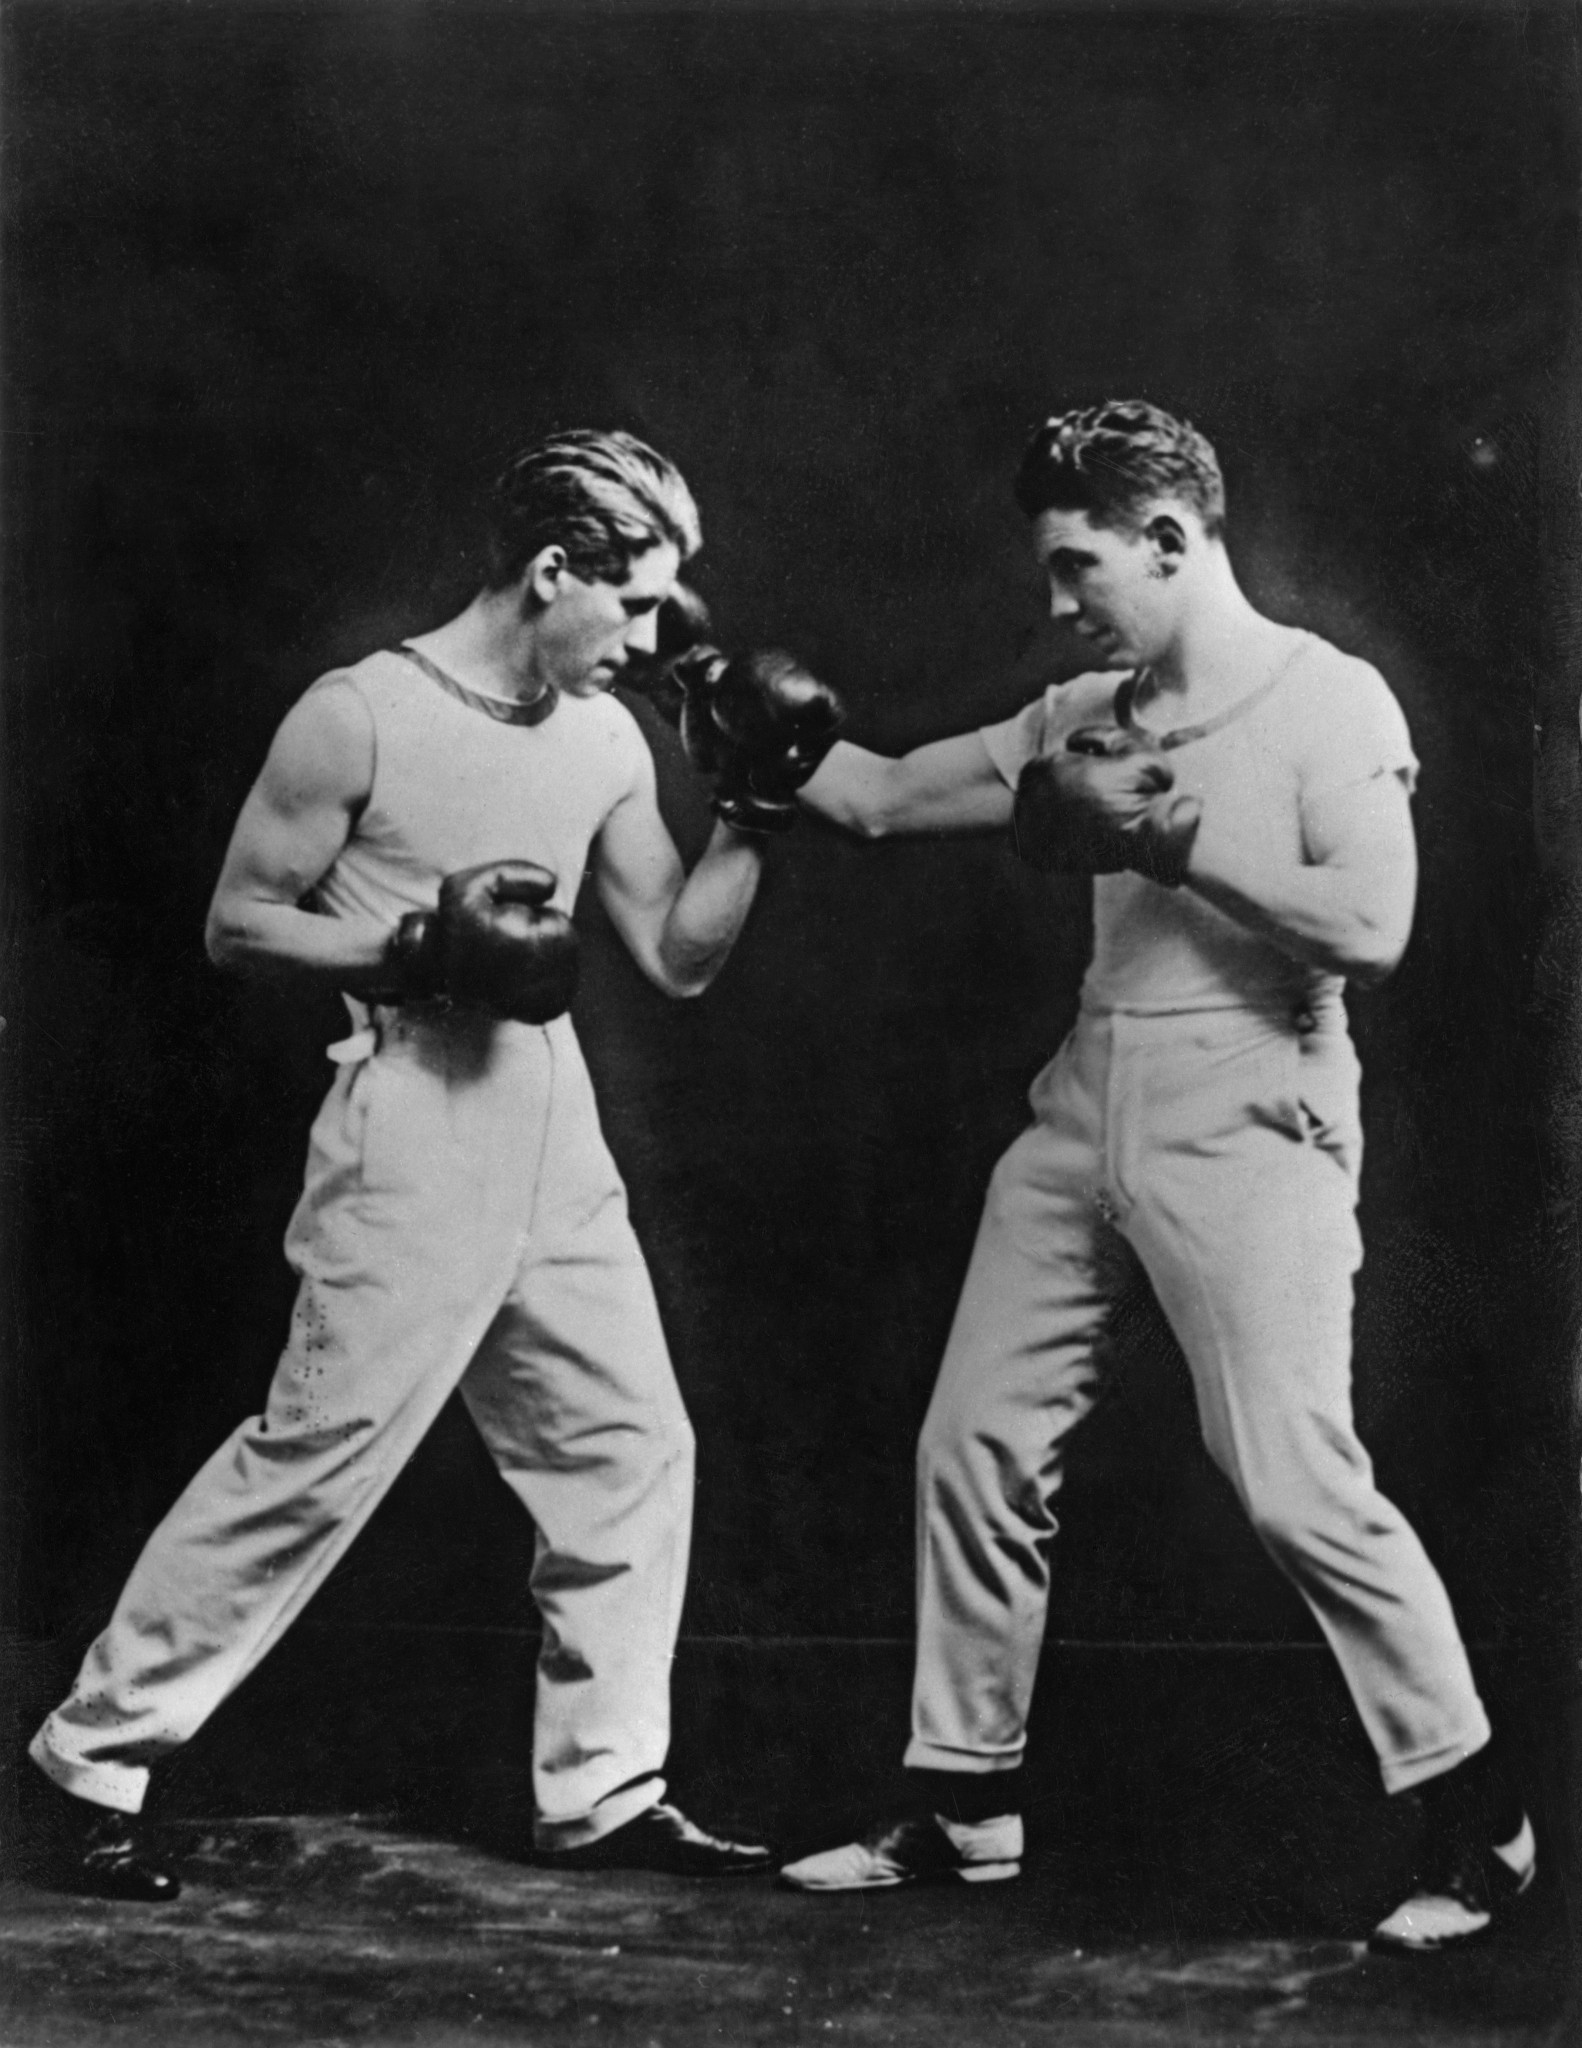 American boxer Eddie Eagan, right, was among the participants at the 1919 event ©Getty Images